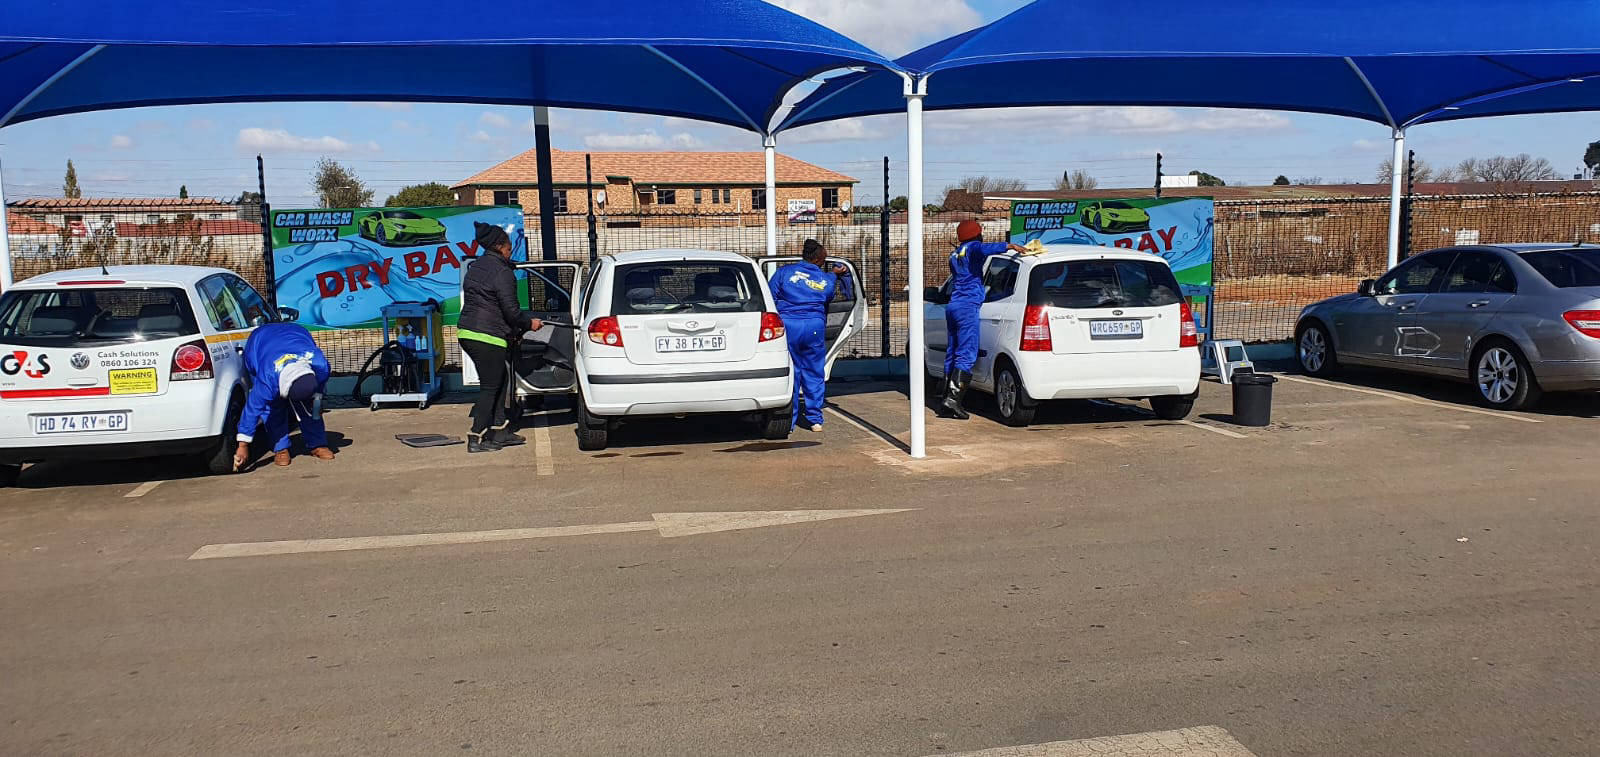 CarWash Worx Dawn Park Branch, Car Wash Franchises Available, CarWash Worx Head Office, Join The Leading Car Wash Franchising Group, Start Your Own Successful Car Wash Business Now